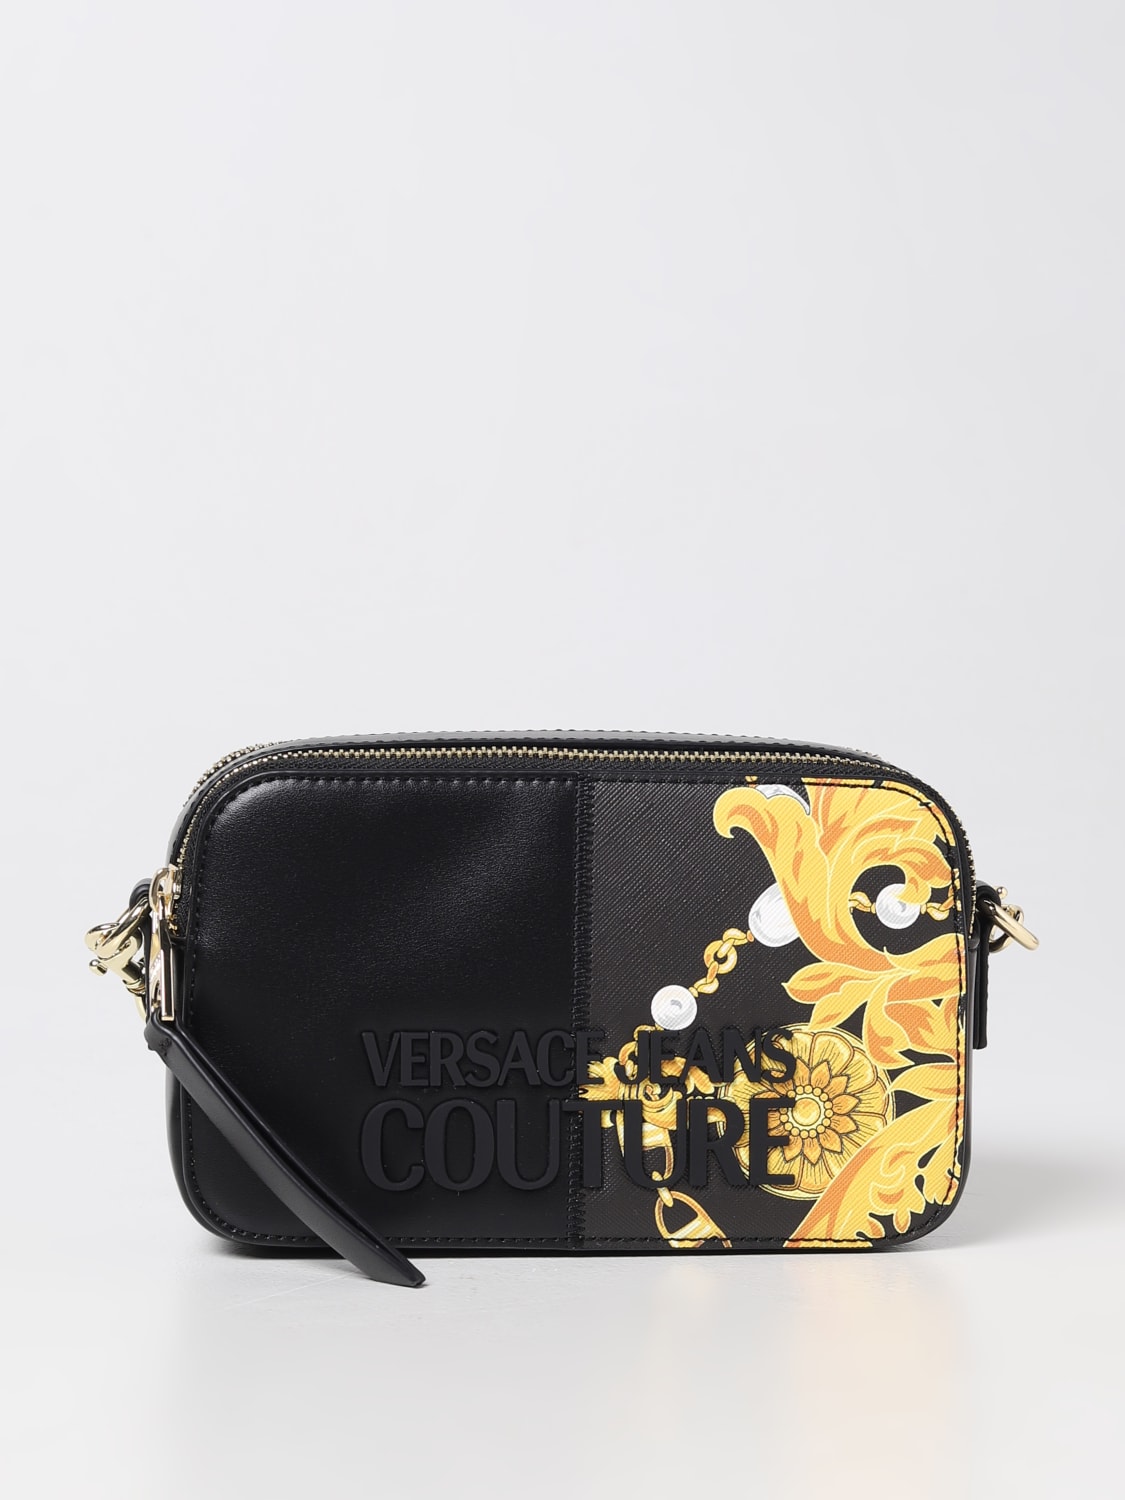 VERSACE JEANS COUTURE ボディバッグ バロック ブラックボディーバッグ ...